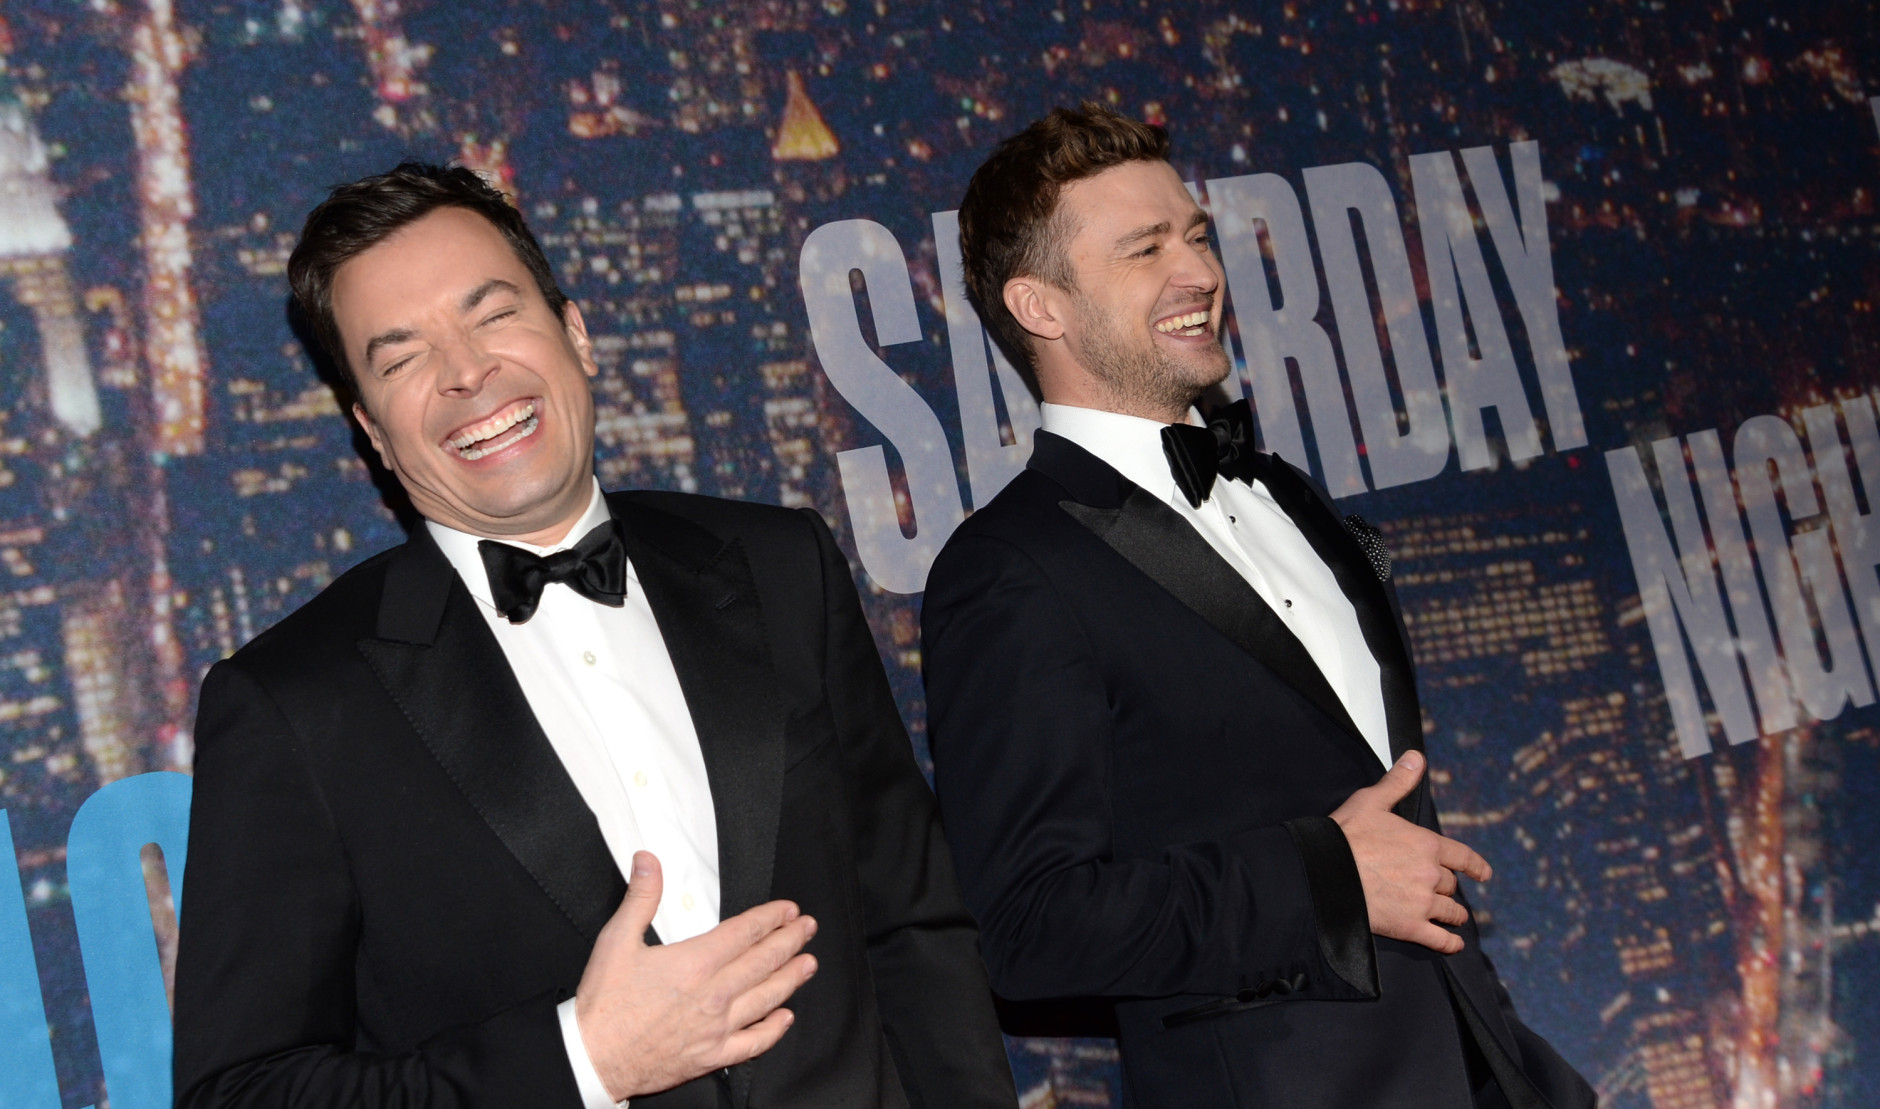 Jimmy Fallon, left, and Justin Timberlake arrive at the Saturday Night Live 40th Anniversary Special at Rockefeller Plaza on Sunday, Feb. 15, 2015, in New York. (Photo by Evan Agostini/Invision/AP)